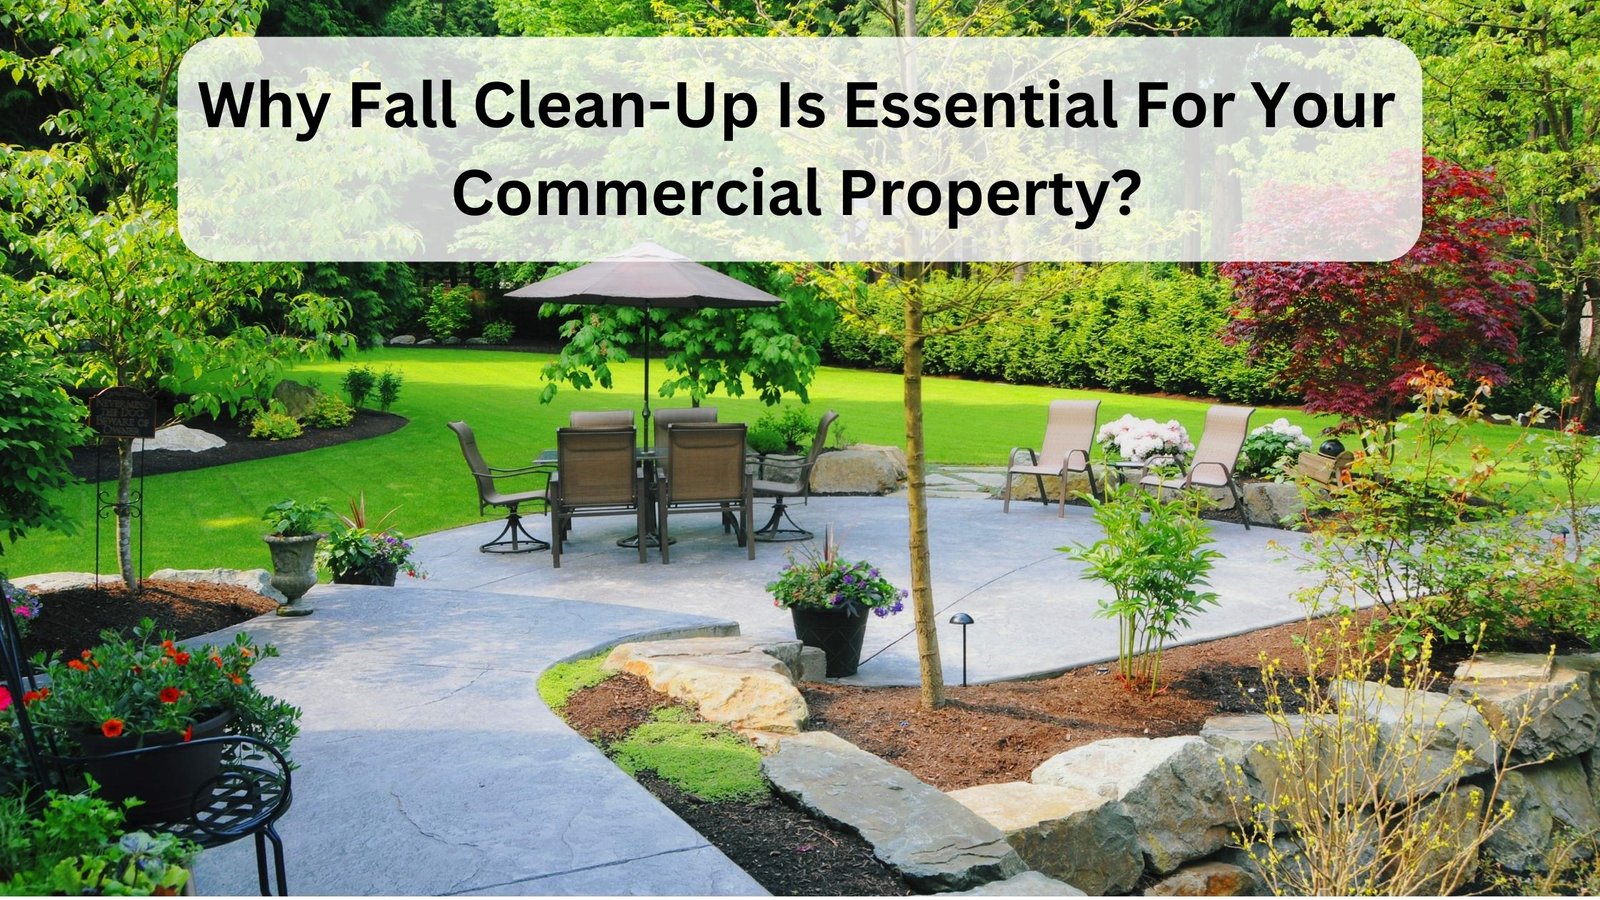 Why Fall Clean-Up Is Essential For Your Commercial Property